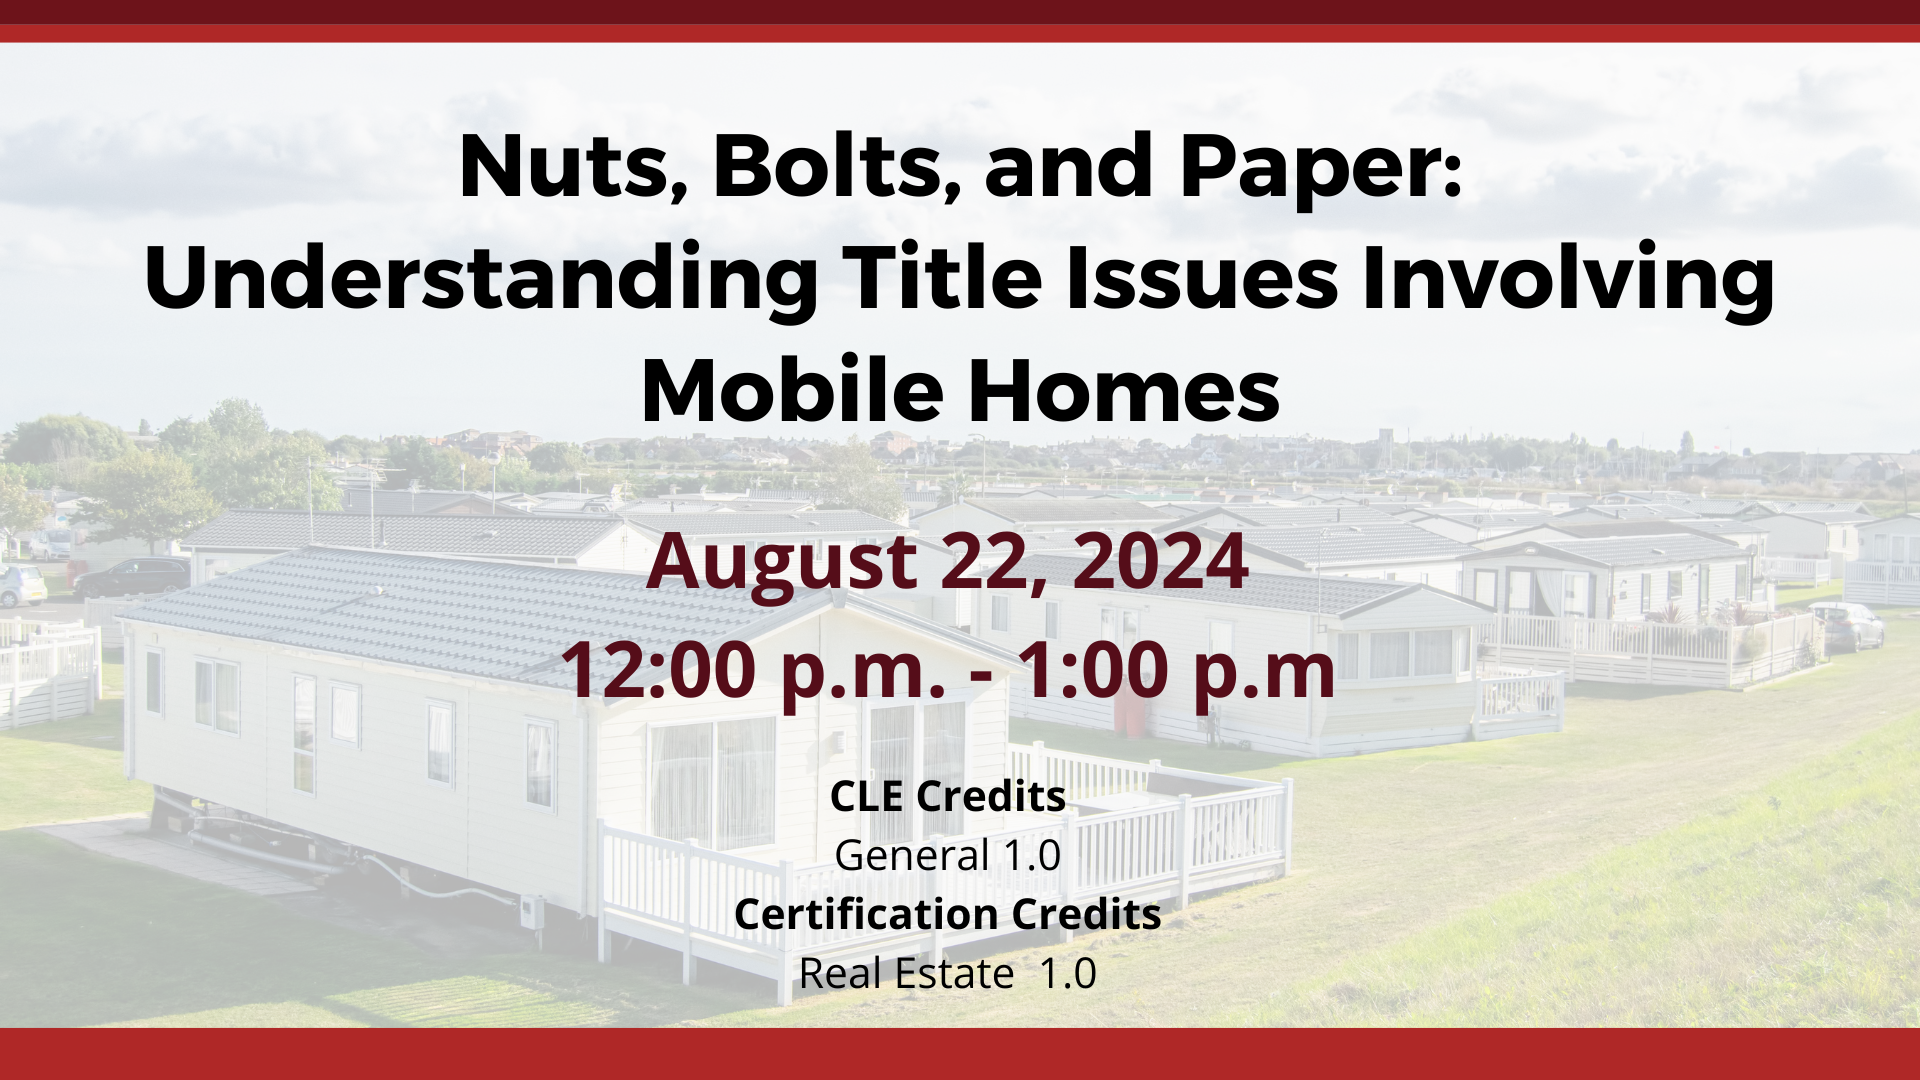 Nuts, Bolts, and Paper: Understanding Title Issues Involving Mobile Homes